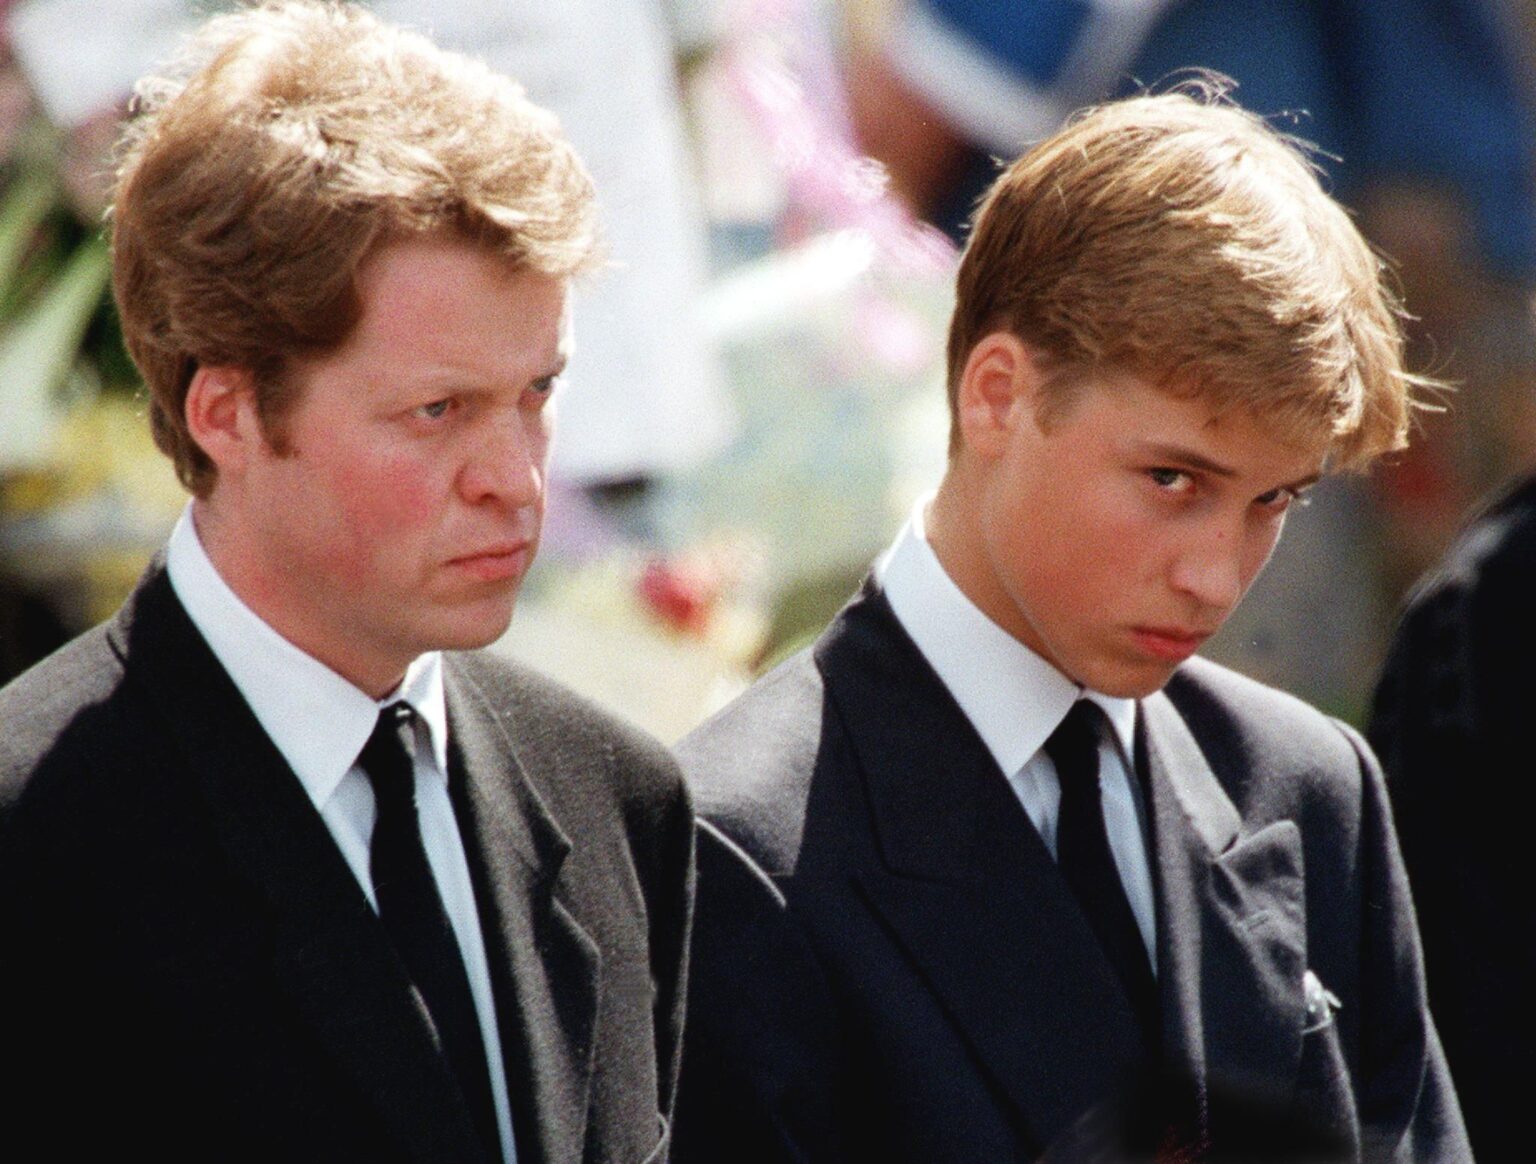 Queen procession brought back memories of Diana's funeral - William